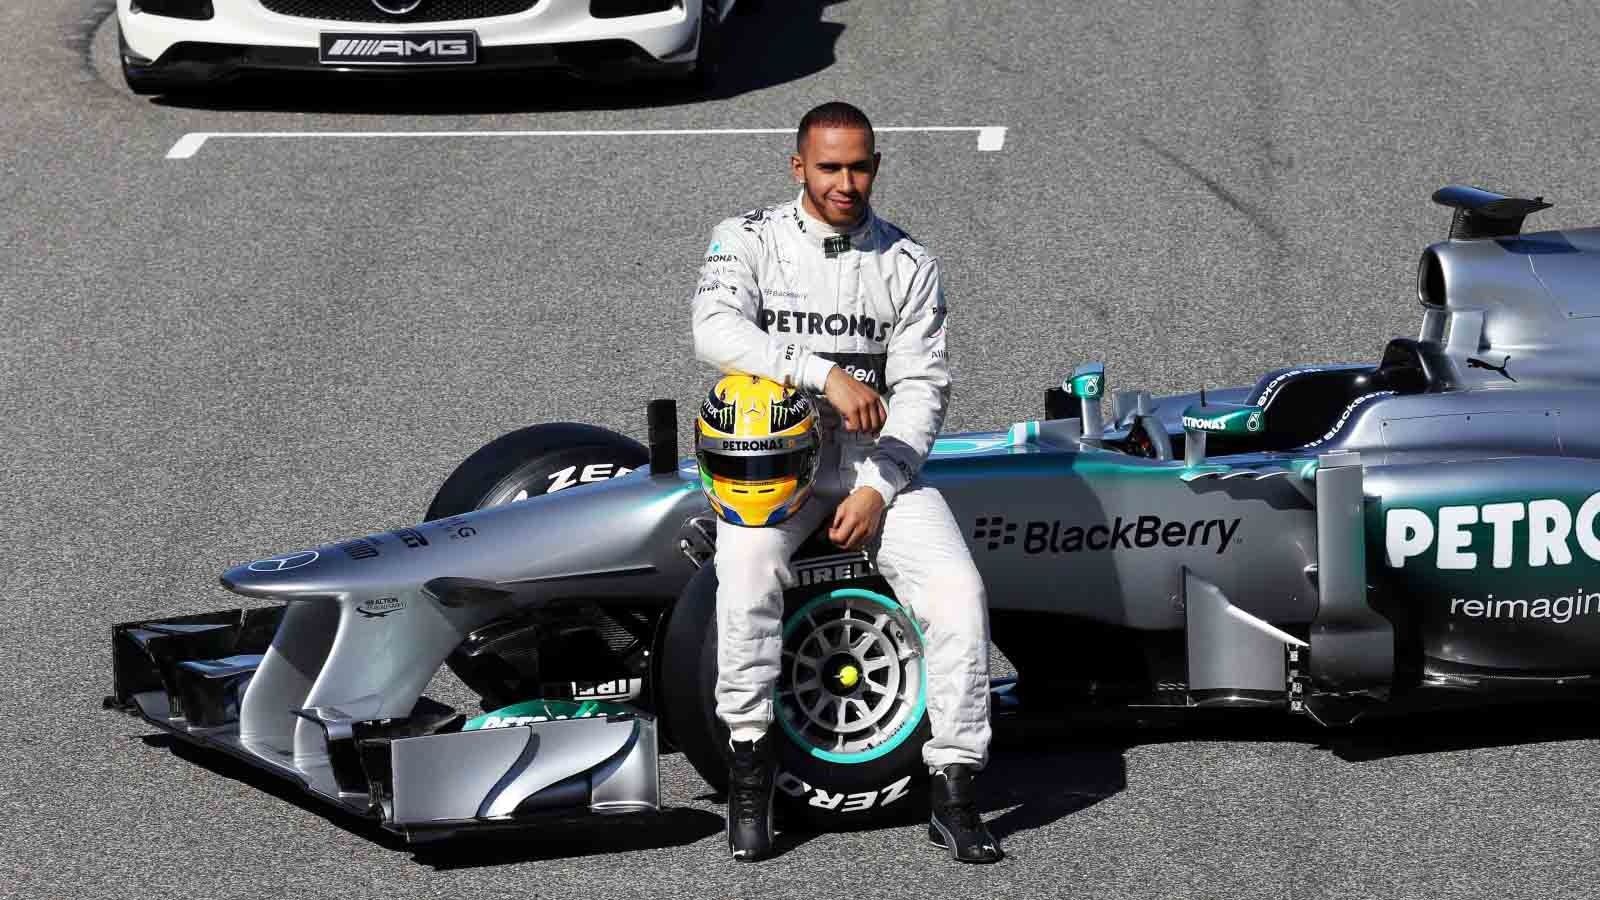 Main Contenders For Hamilton's Seat At Mercedes Revealed